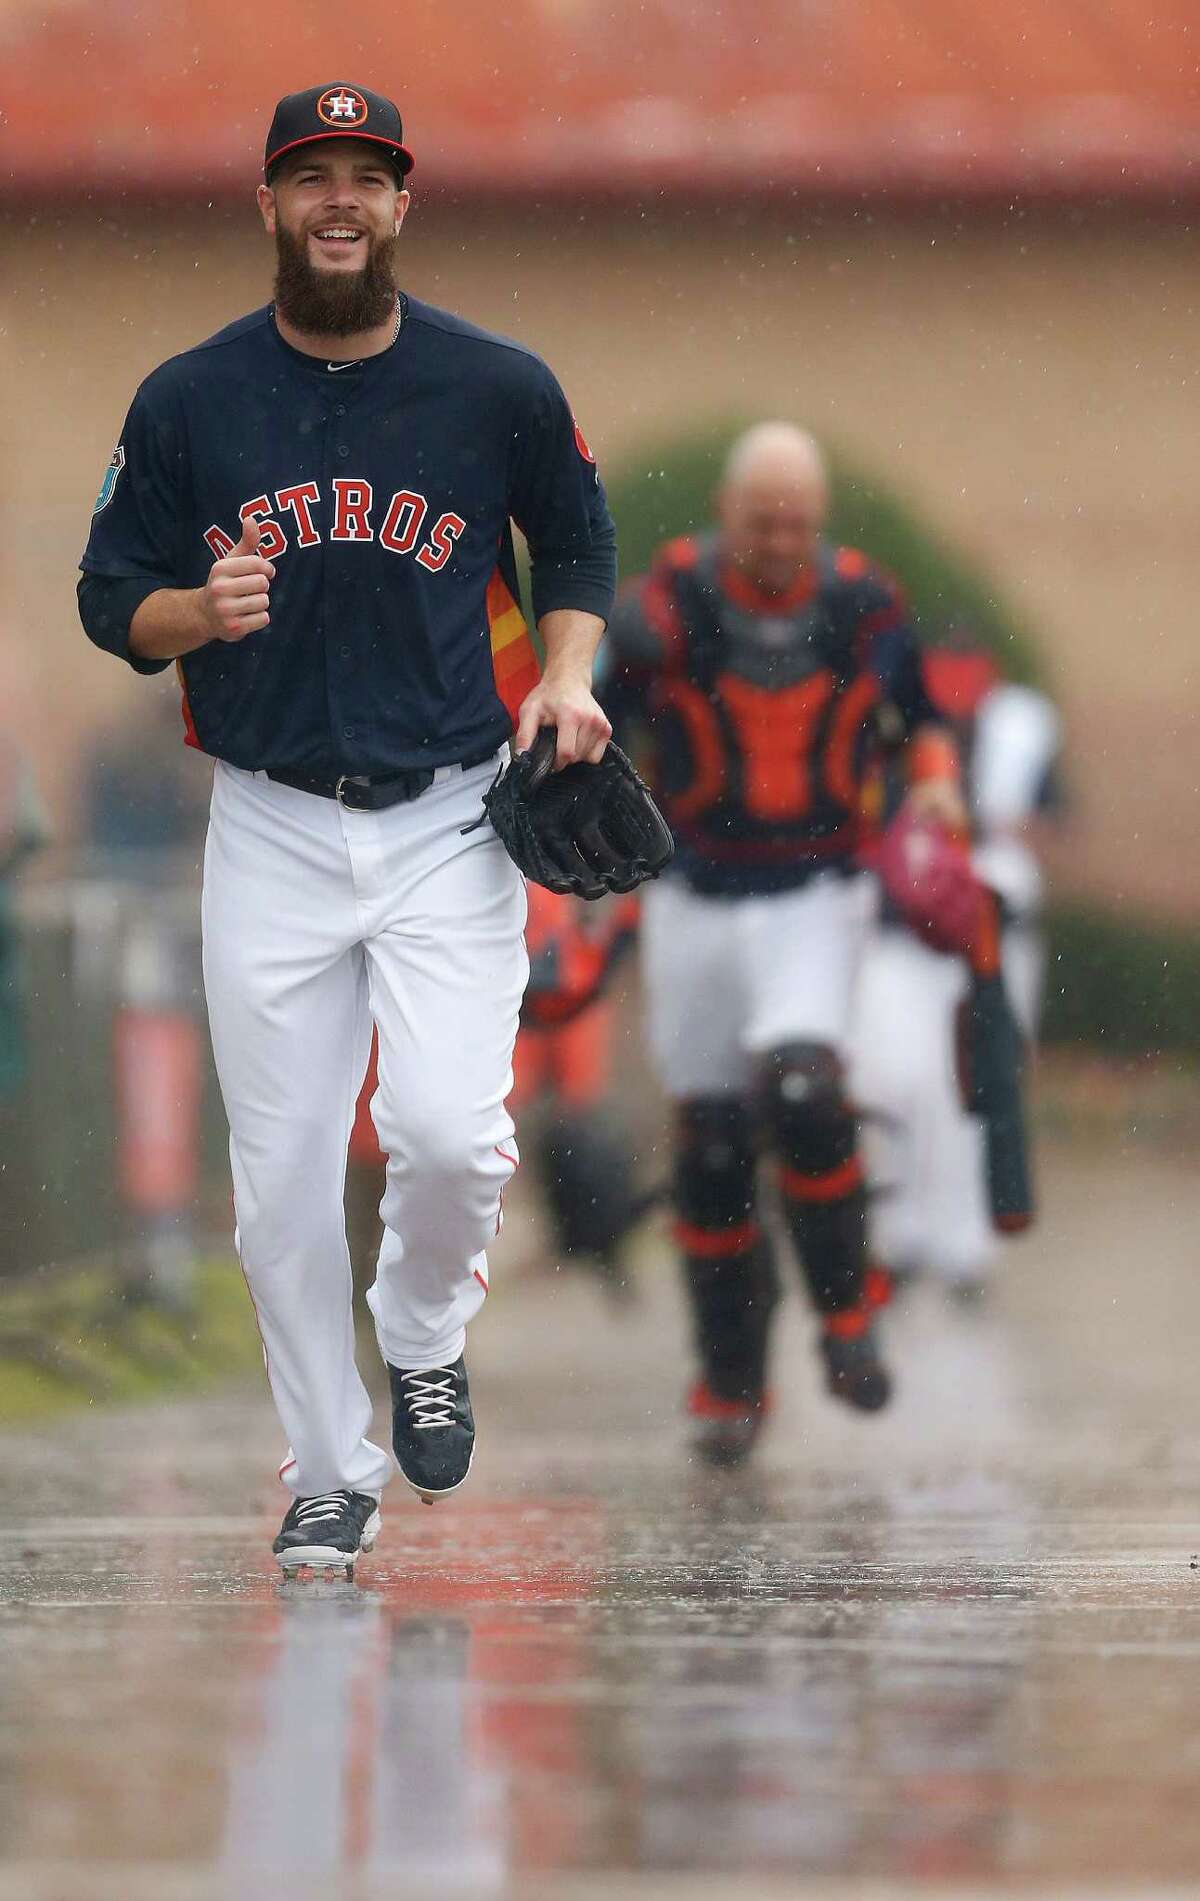 Houston Astros pitcher Dallas Keuchel runs to the batting cages as players worked out inside due to the rain during Astros spring training in Kissimmee, Florida, Wednesday, Feb. 24, 2016.